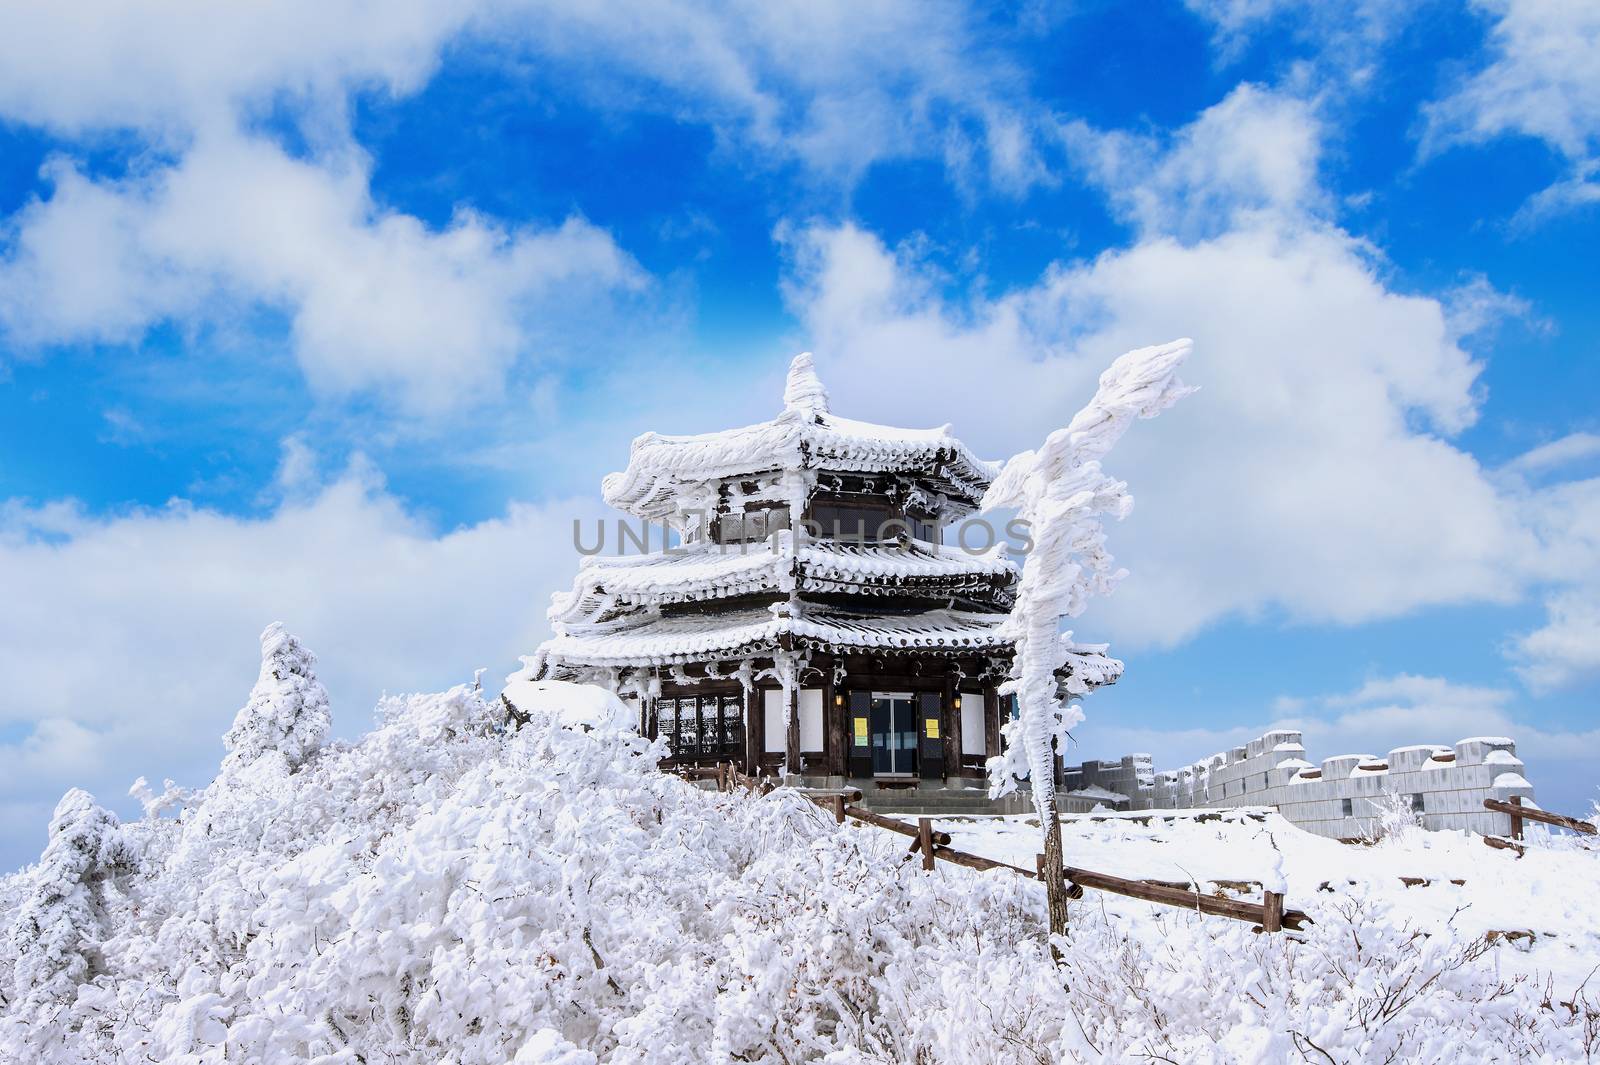 Deogyusan mountains is covered by snow in winter,South Korea.